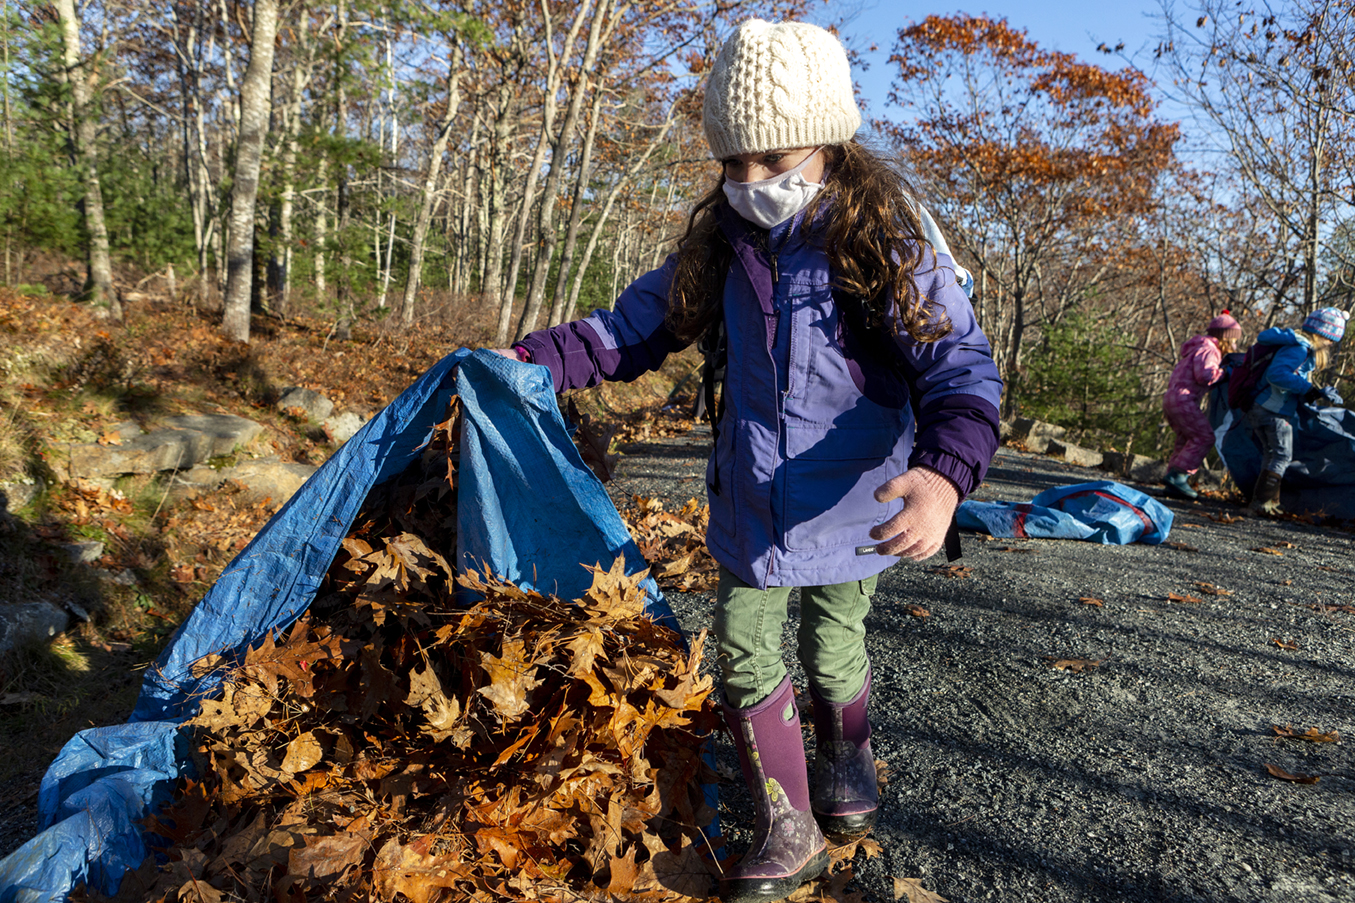 Emily Ellis, 7, works to clear leaves from the carriage road as part of their Ellis Group volunteer group during Friends of Acadia’s annual Take Pride in Acadia Day